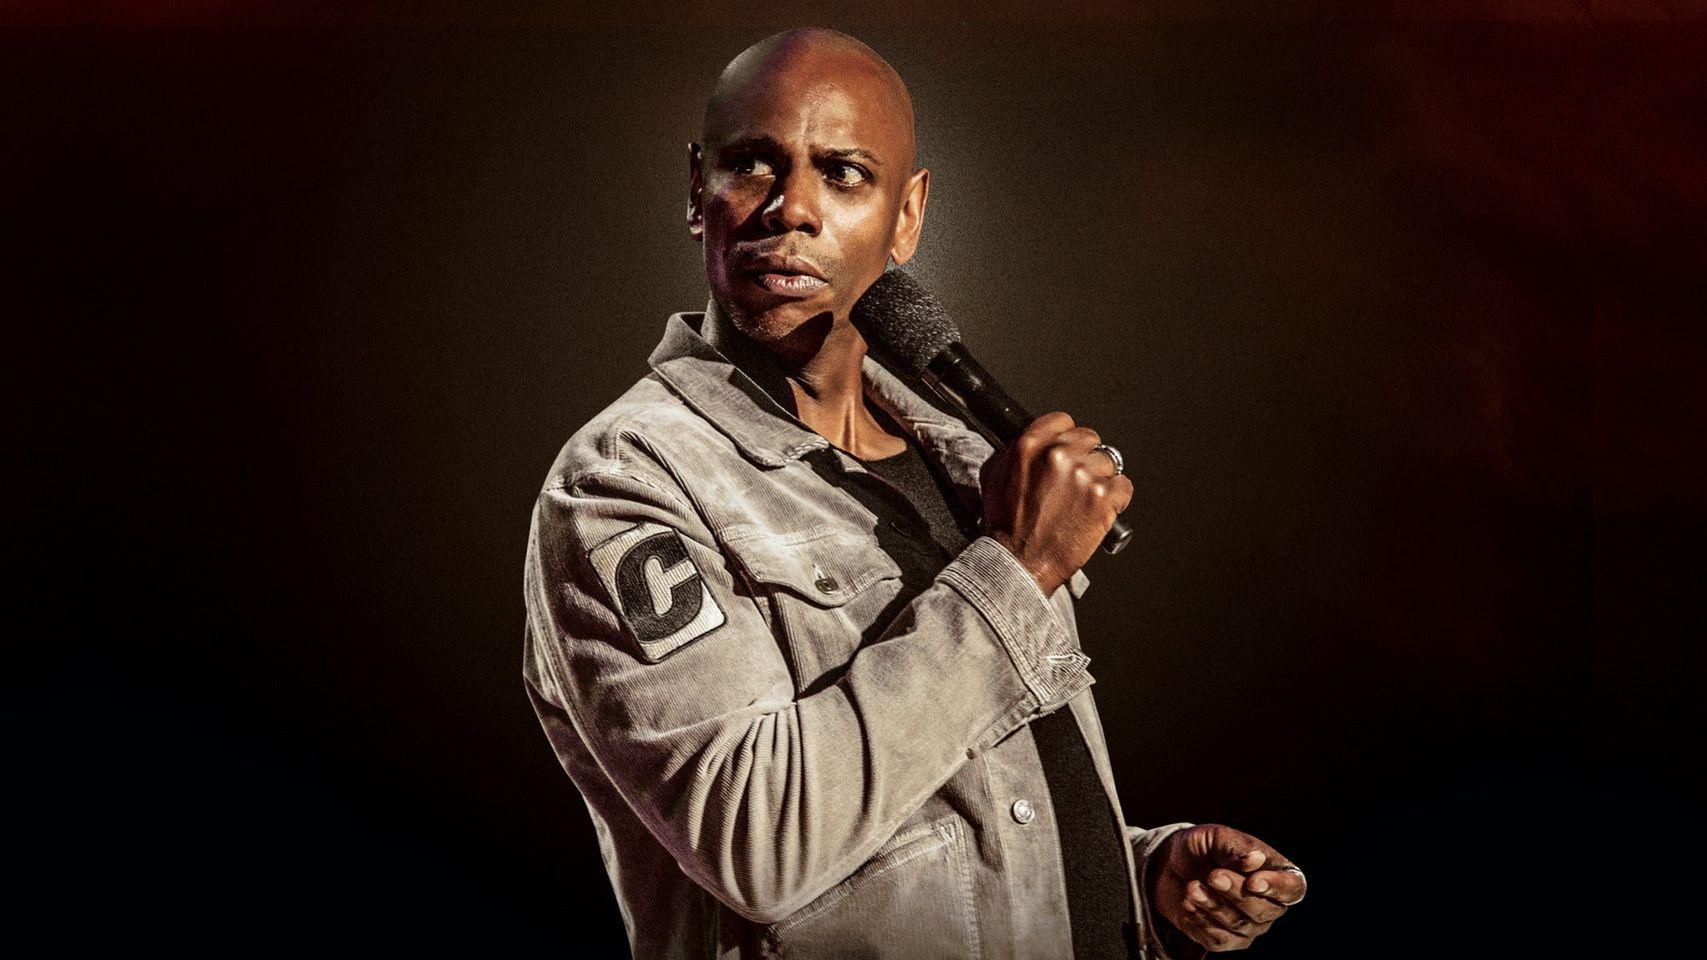 Dave Chappelle and Friends